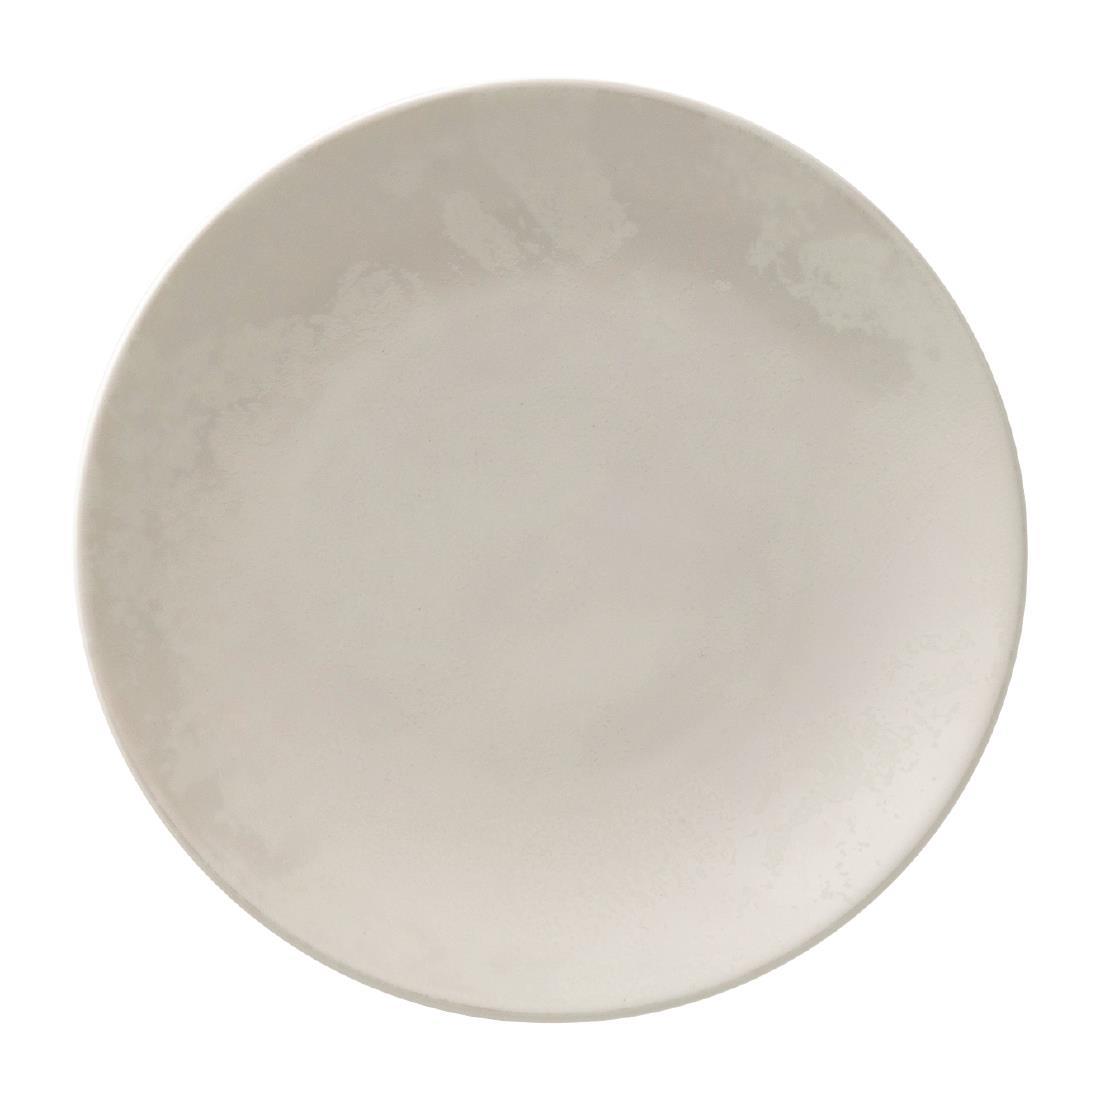 Royal Crown Derby Crushed Velvet Pearl Coupe Plate 164mm (Pack of 6) - FE135  - 1